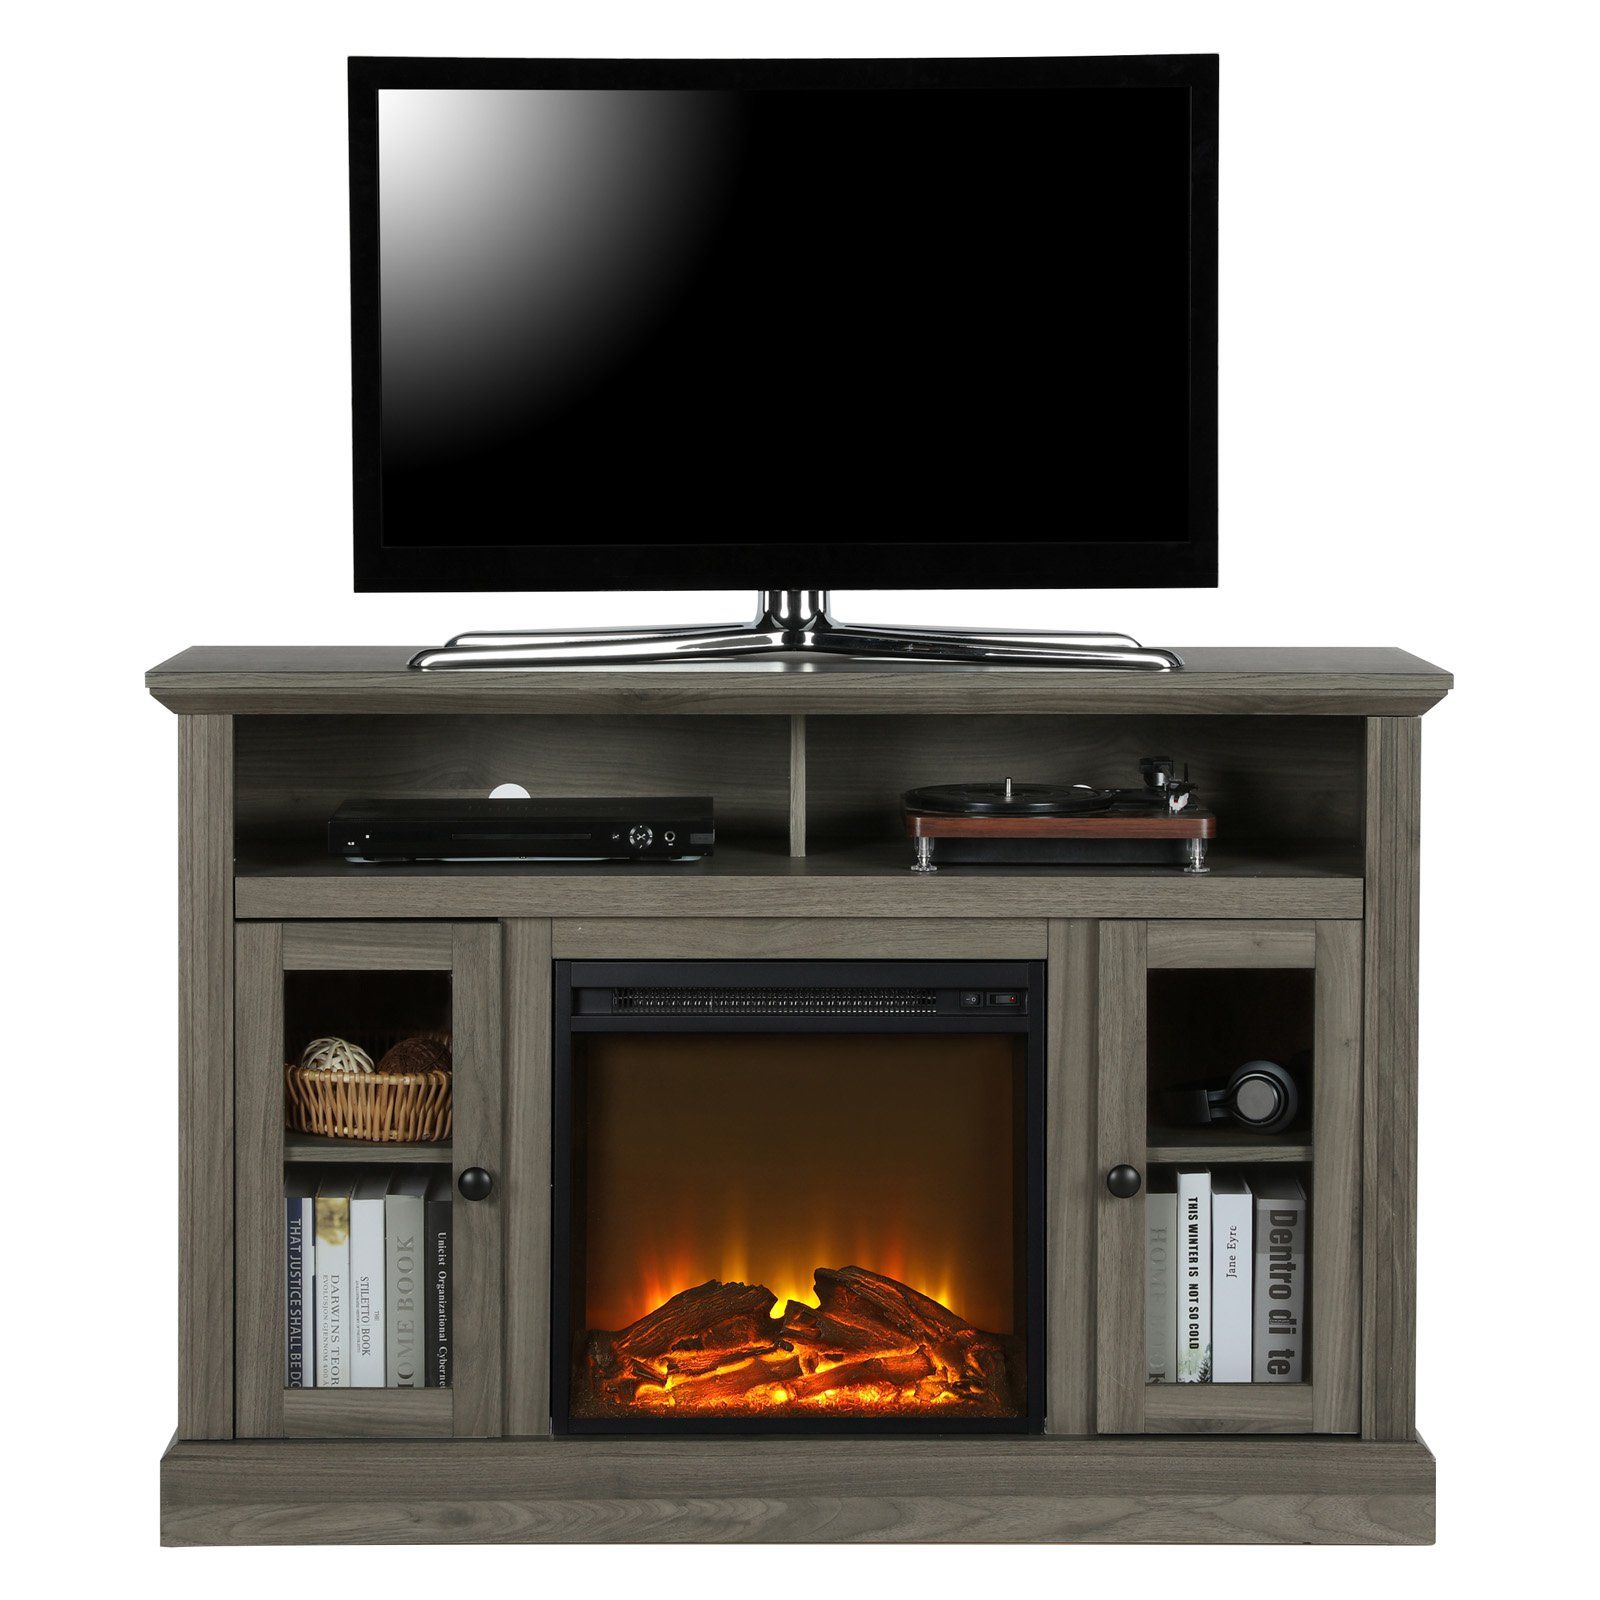 Real Flame Electric Fireplace Tv Stand Elegant Ameriwood Home Chicago Electric Fireplace Tv Stand In 2019